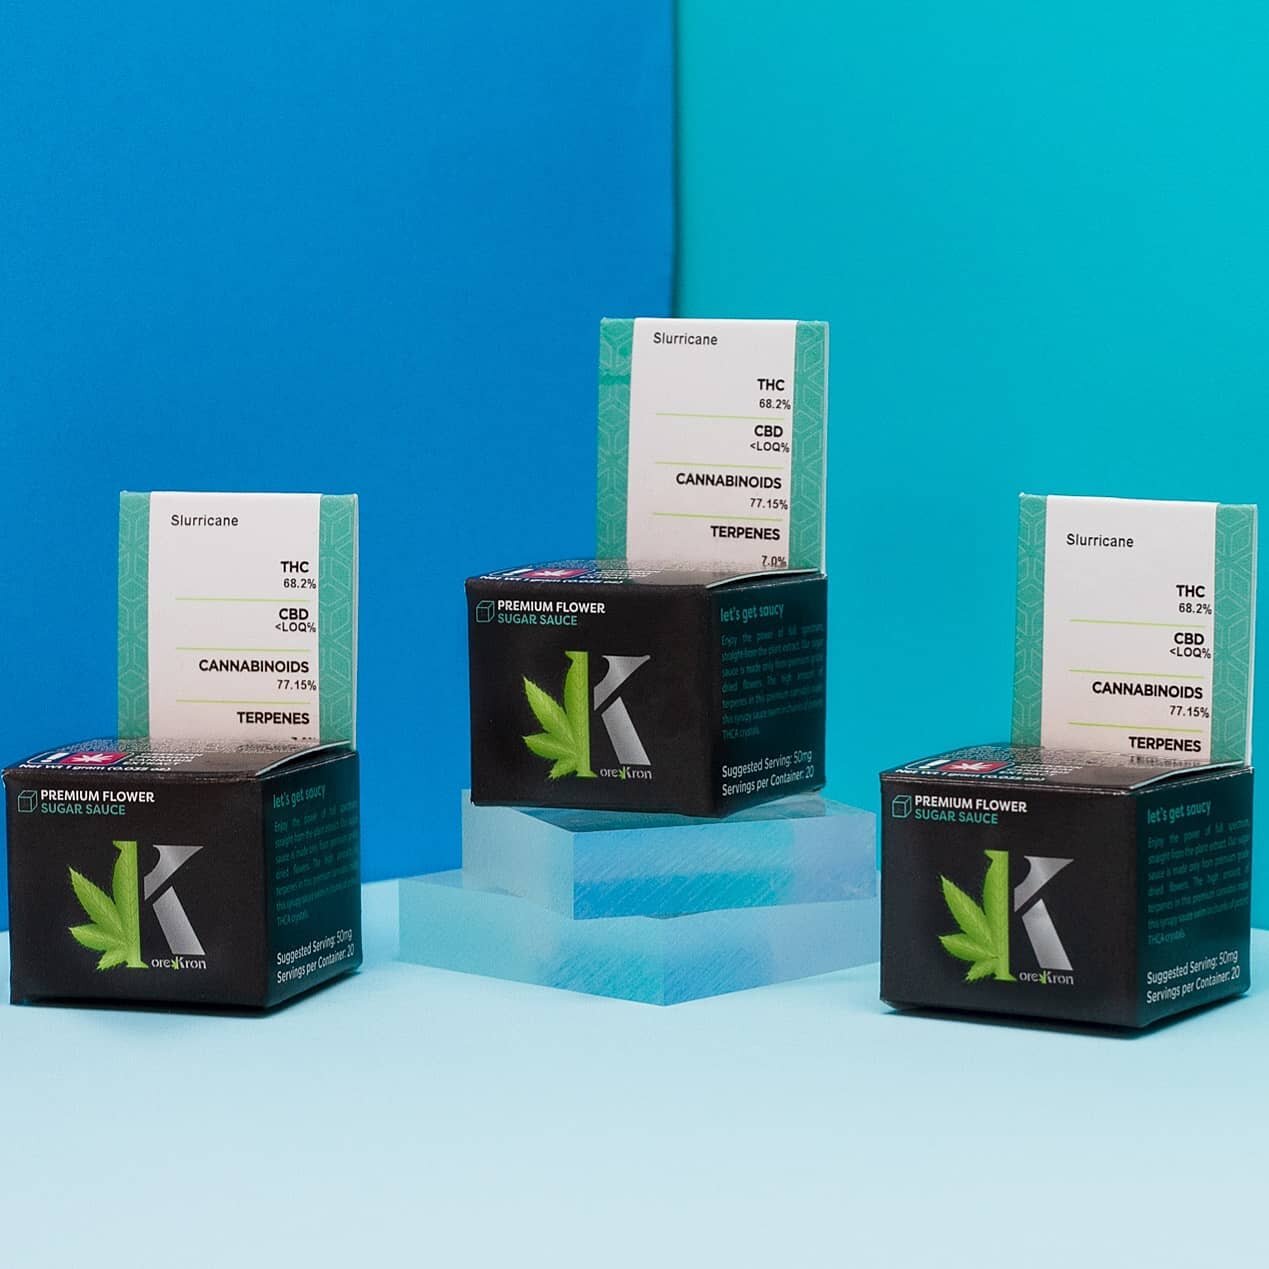 Little boxes 📦 Little boxes everywhere! 
⠀⠀⠀⠀⠀⠀⠀⠀⠀
My clients at @orekron are coming in hot with new premium dab packaging in colorful little boxes, designed by me! I specialize in SMALL design - ensuring that Oregon cannabis companies stay complain